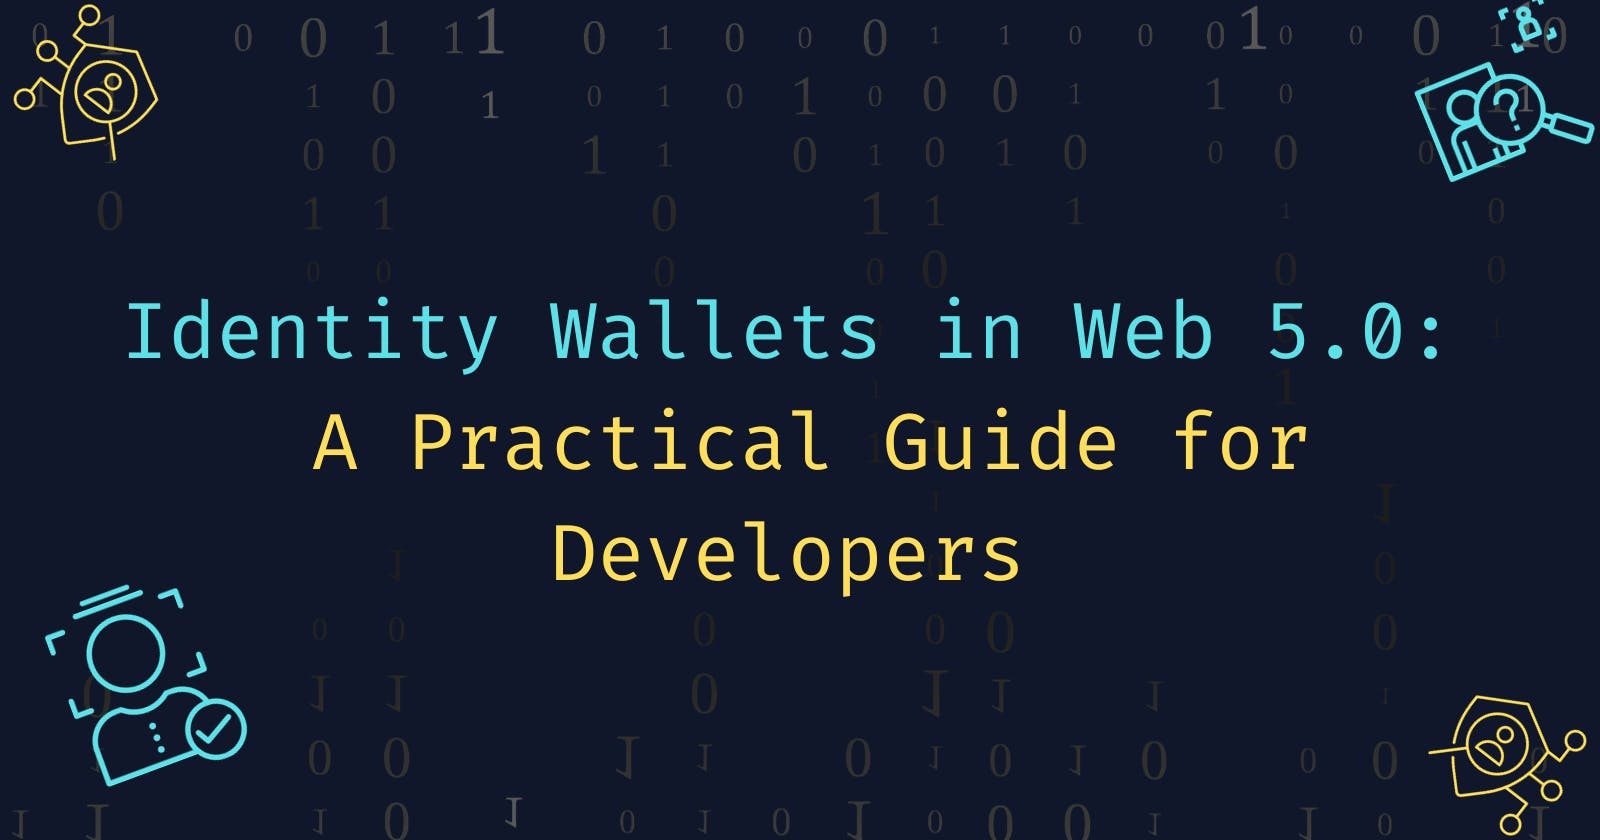 Identity Wallets in Web 5.0: A Practical Guide for Developers